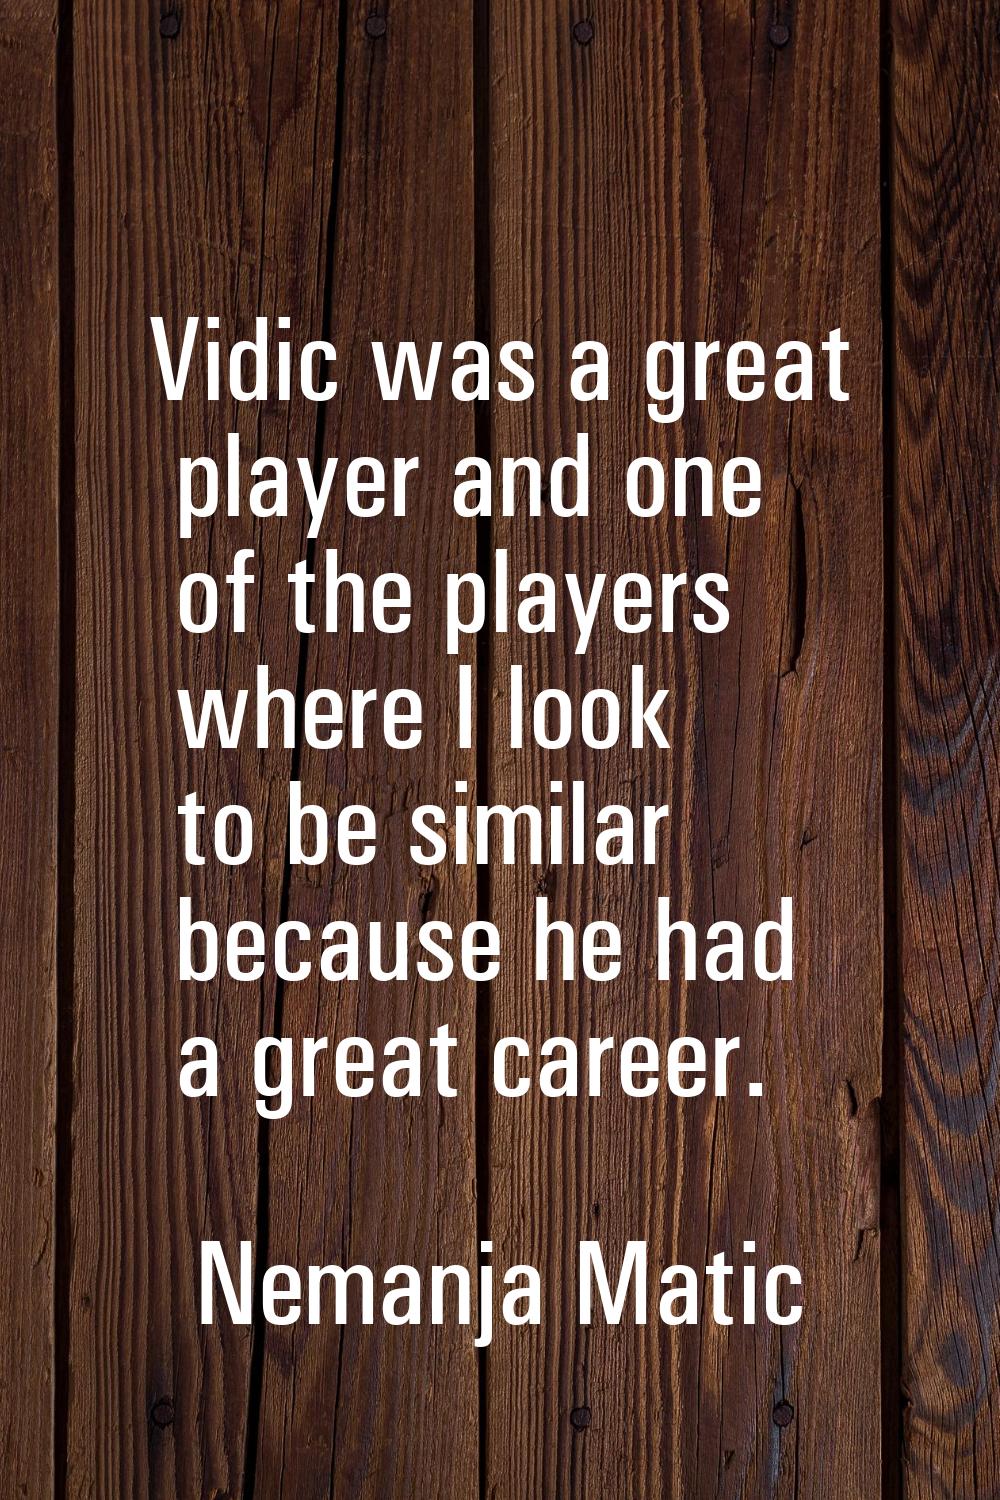 Vidic was a great player and one of the players where I look to be similar because he had a great c